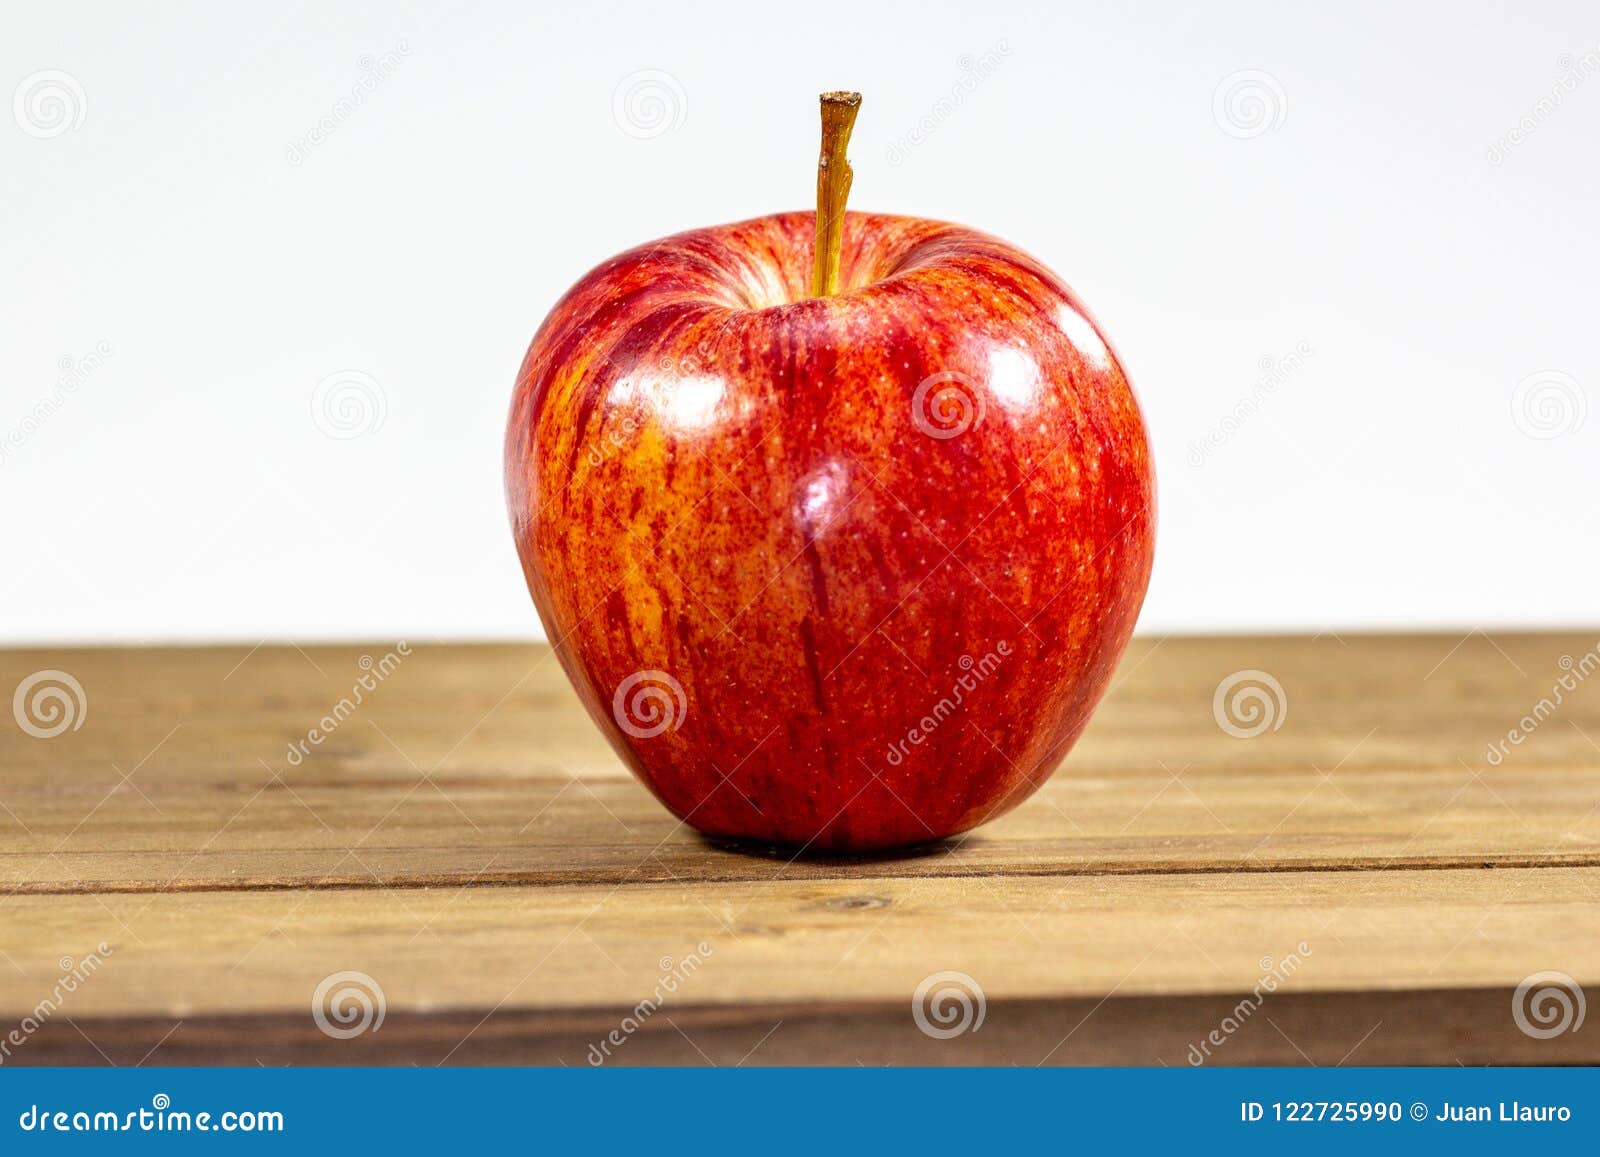 there is apple on the table